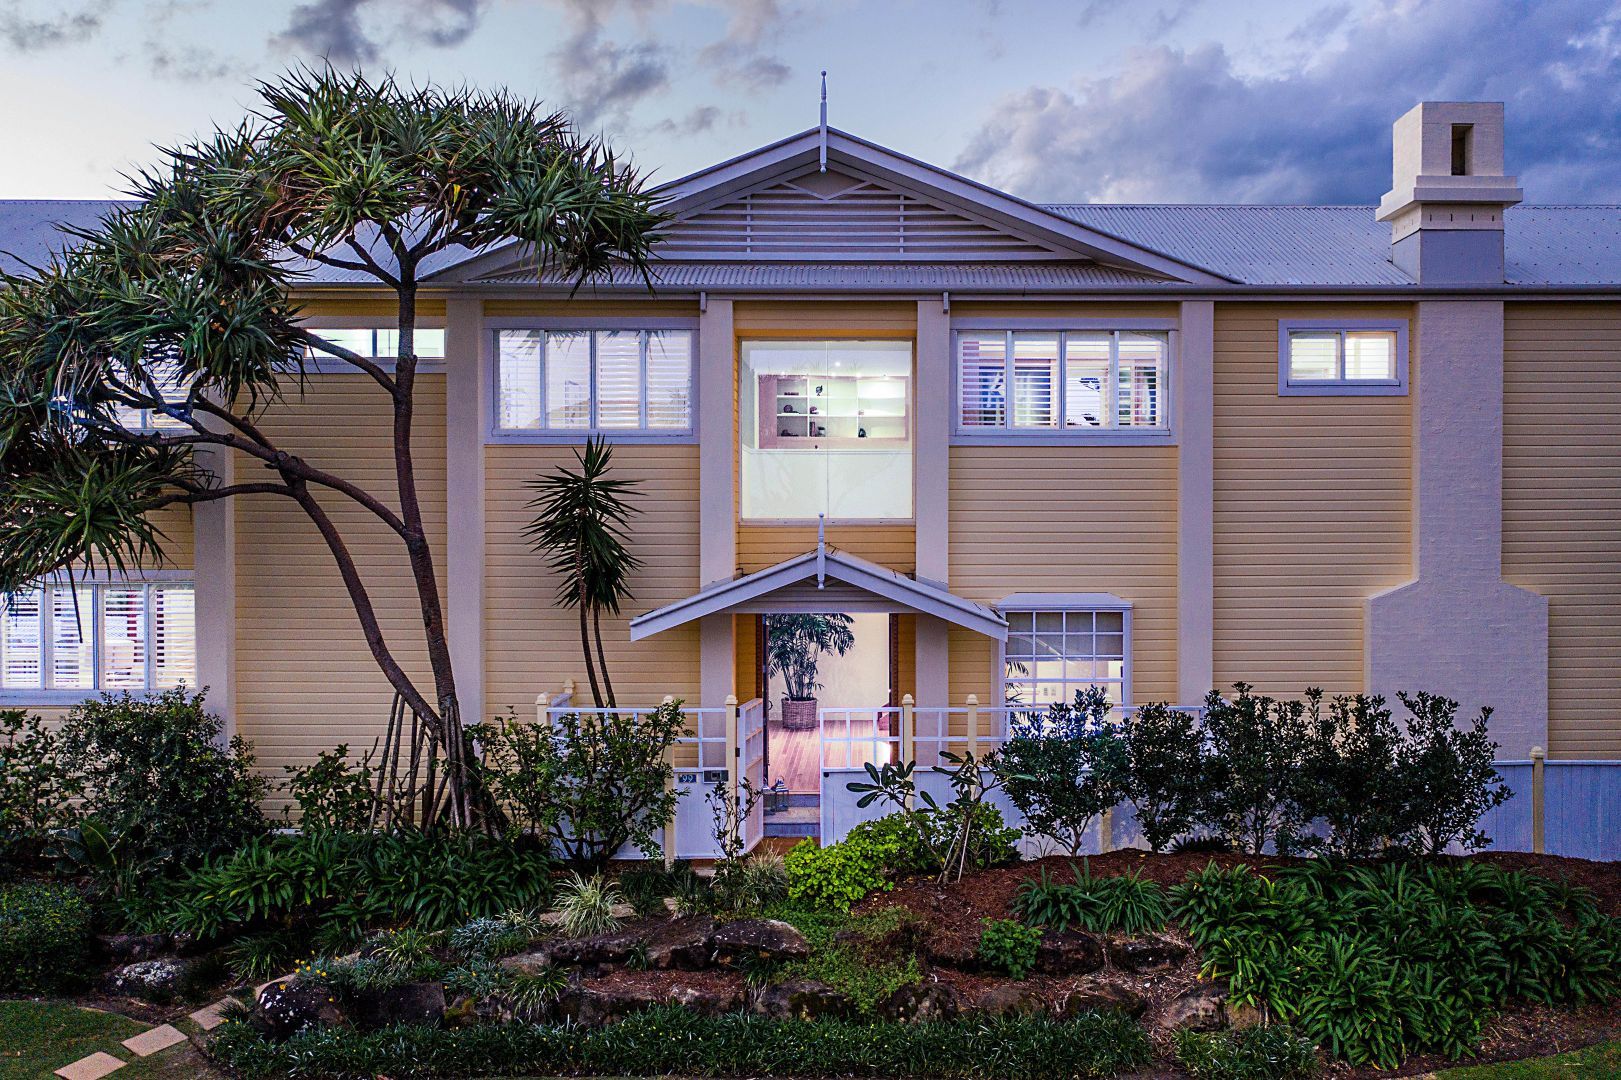 On The Market: This $14 Million Mermaid Beach Home Is A Slice Of Sun-Drenched Heaven